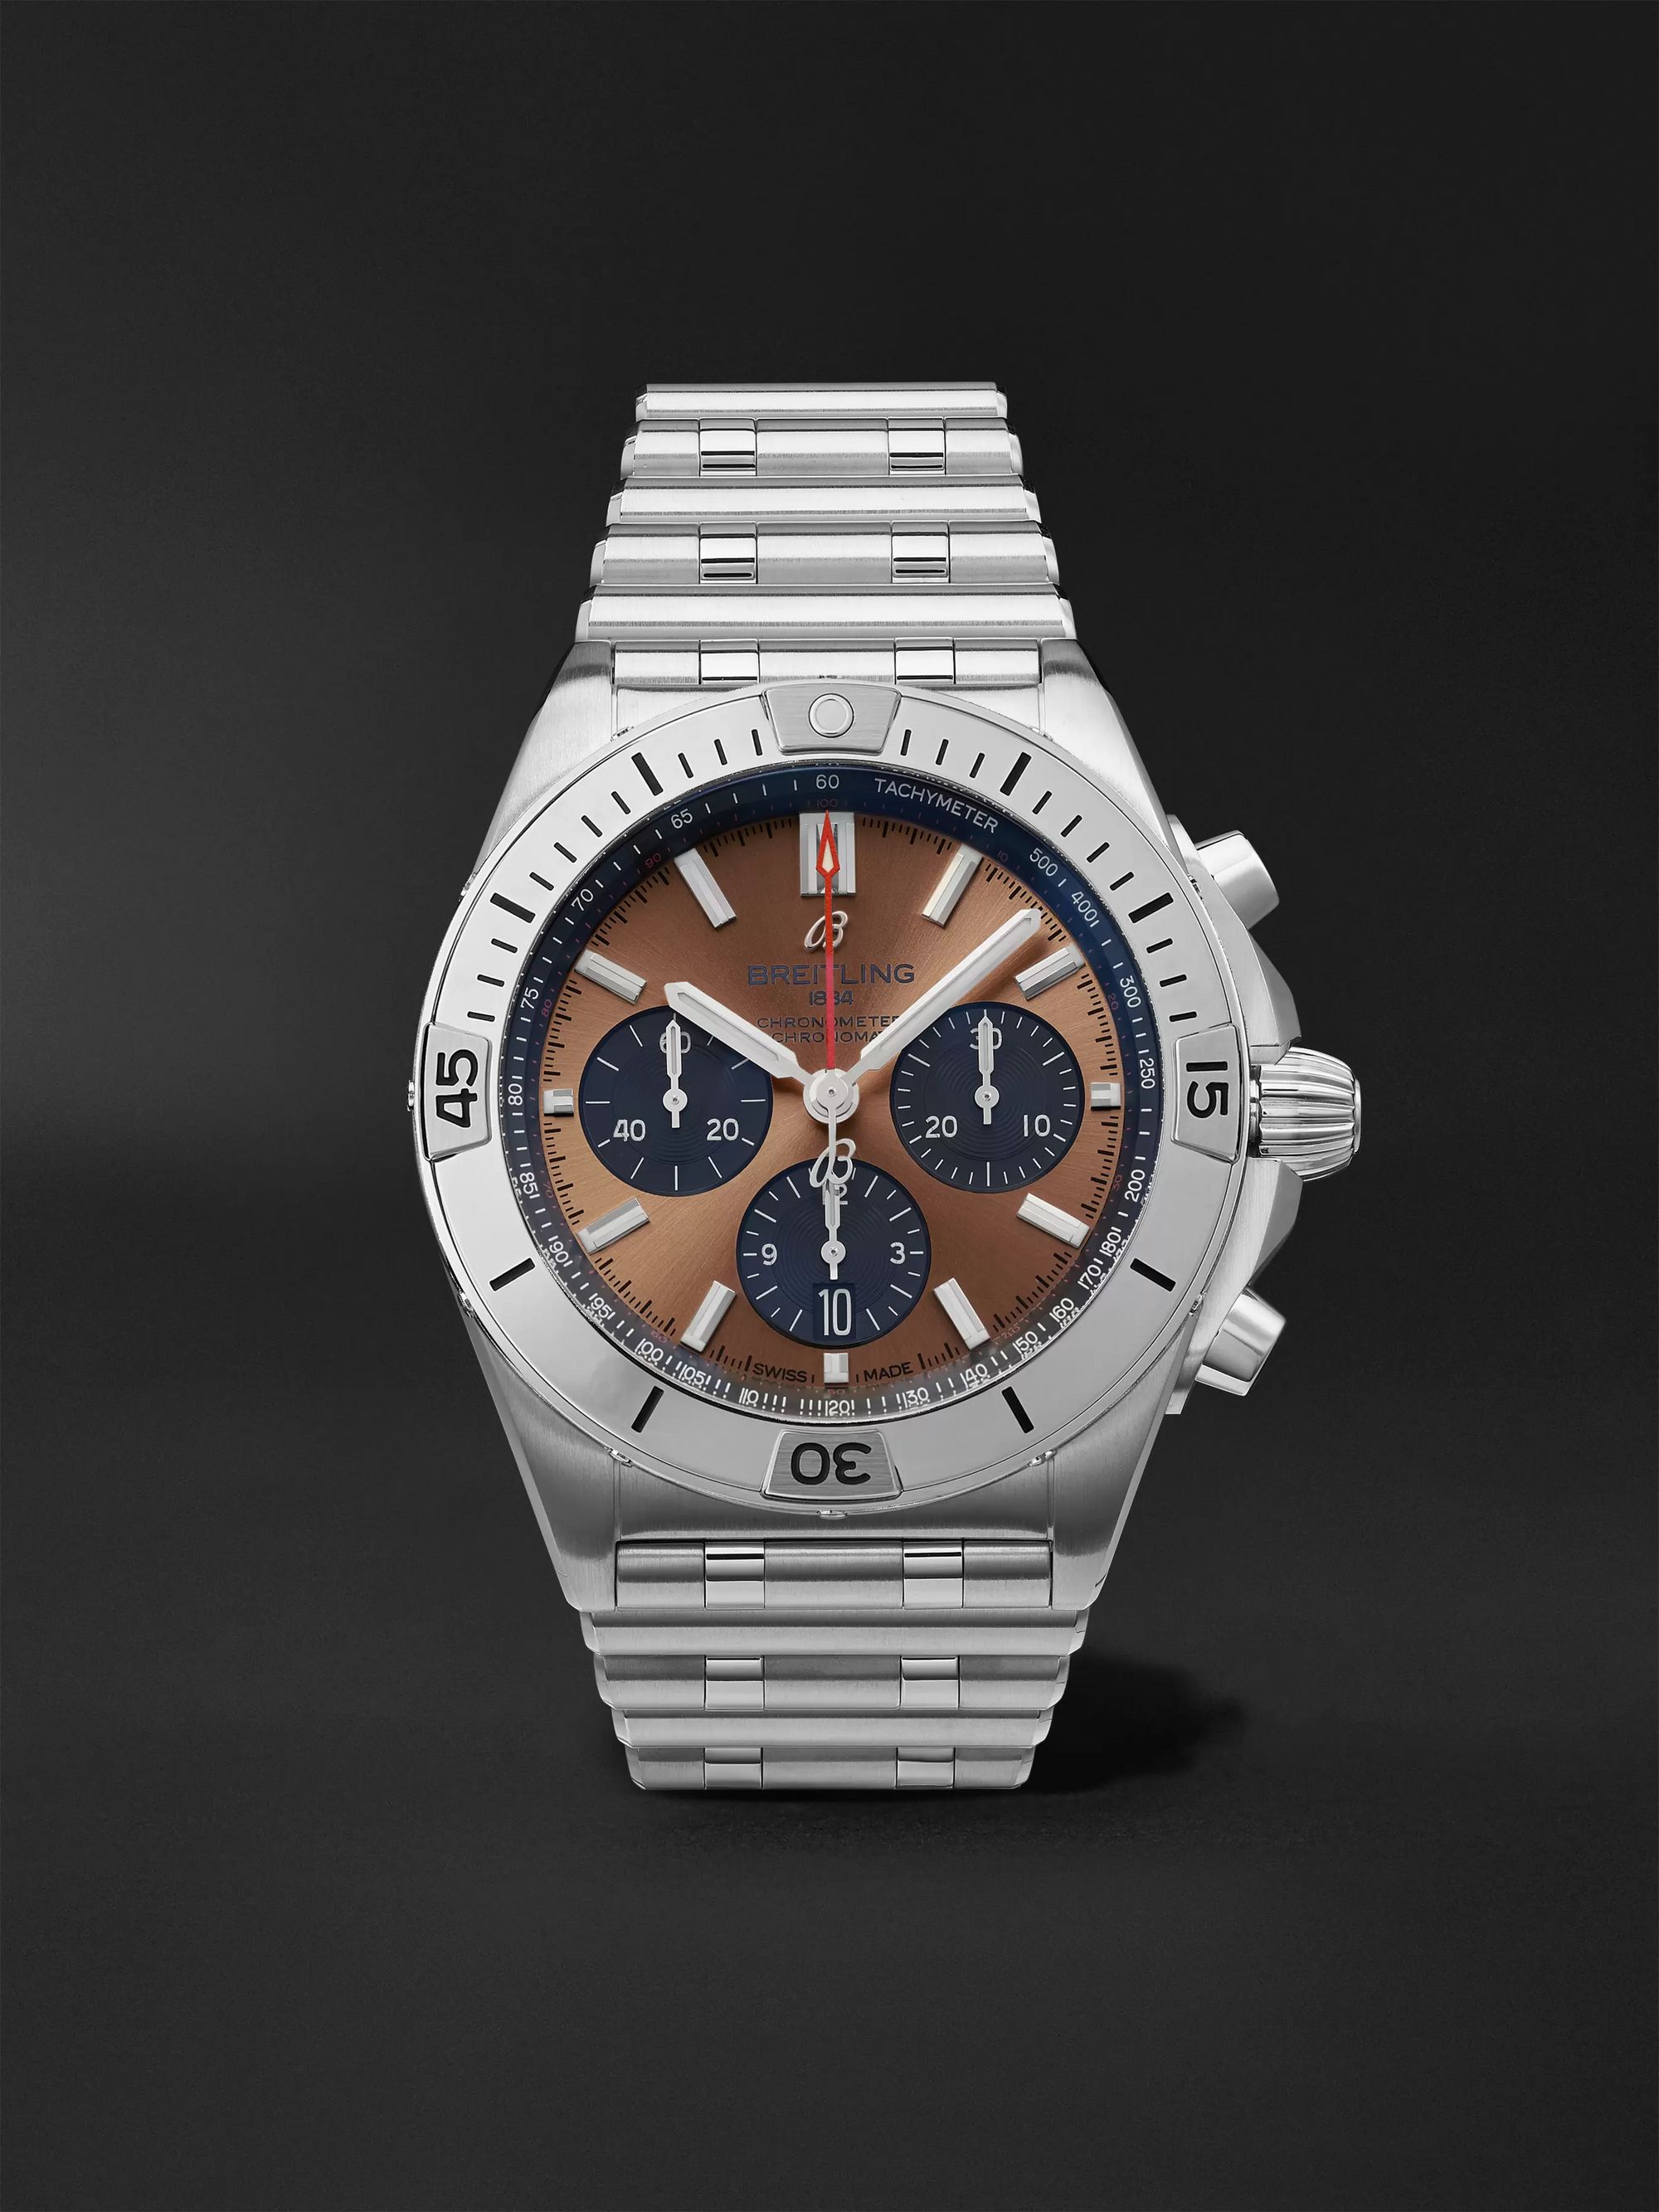 BREITLING Chronomat B01 Automatic Chronograph 42mm Stainless Steel Watch, Ref. No. AB0134101K1A1